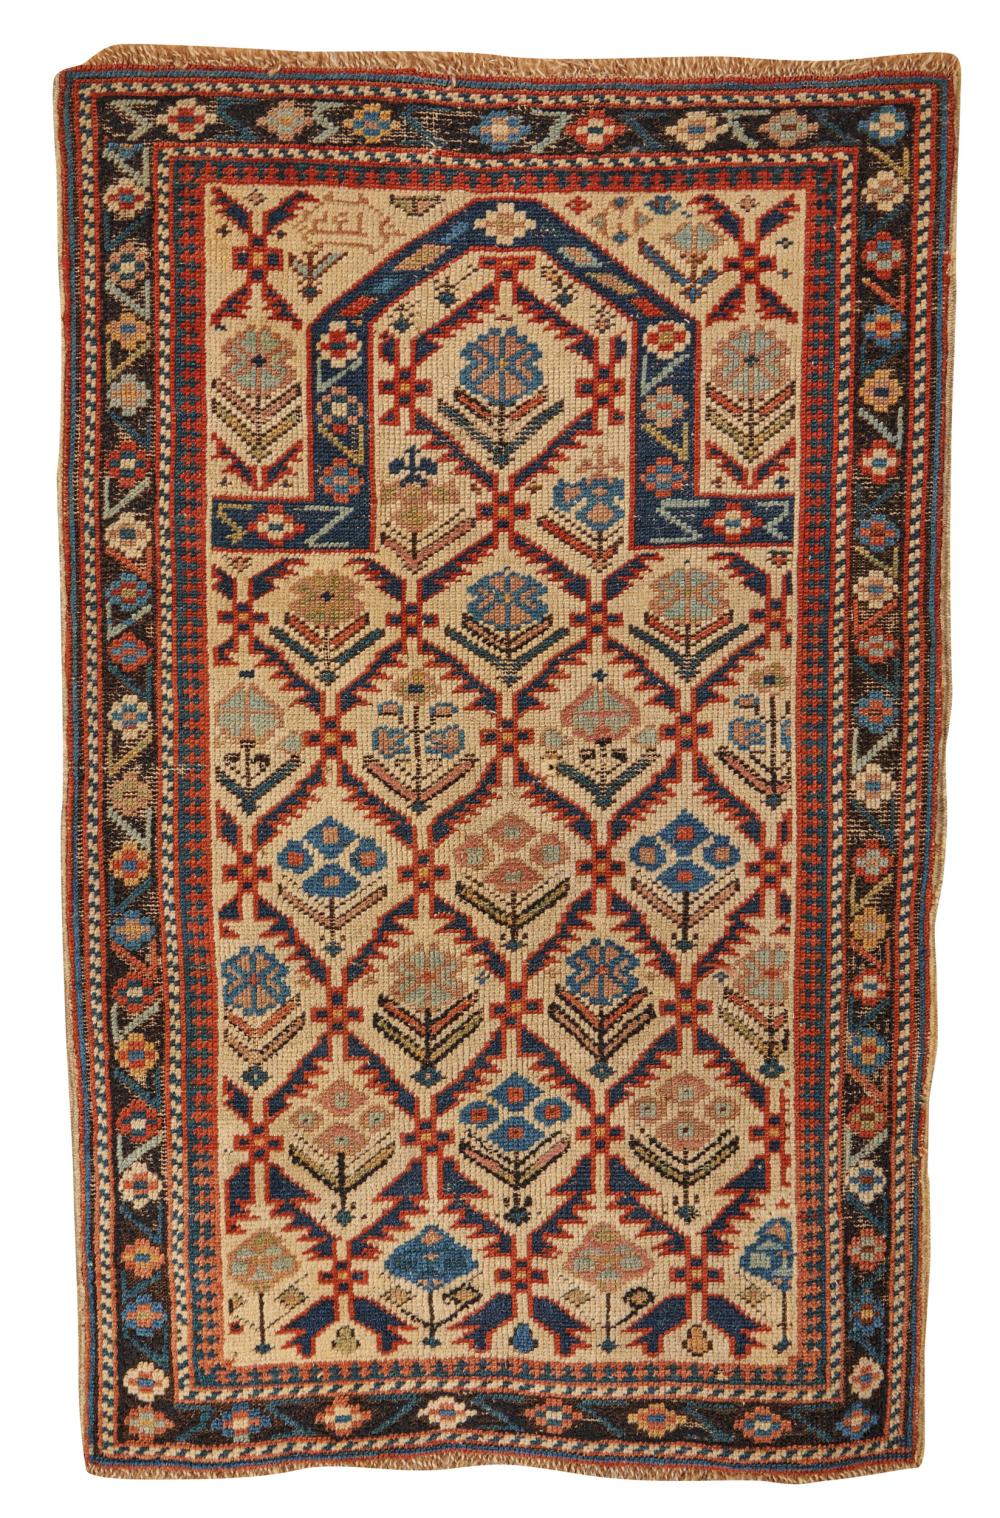 UNUSUAL SMALL FORMAT SHIRVAN PAYER 367157